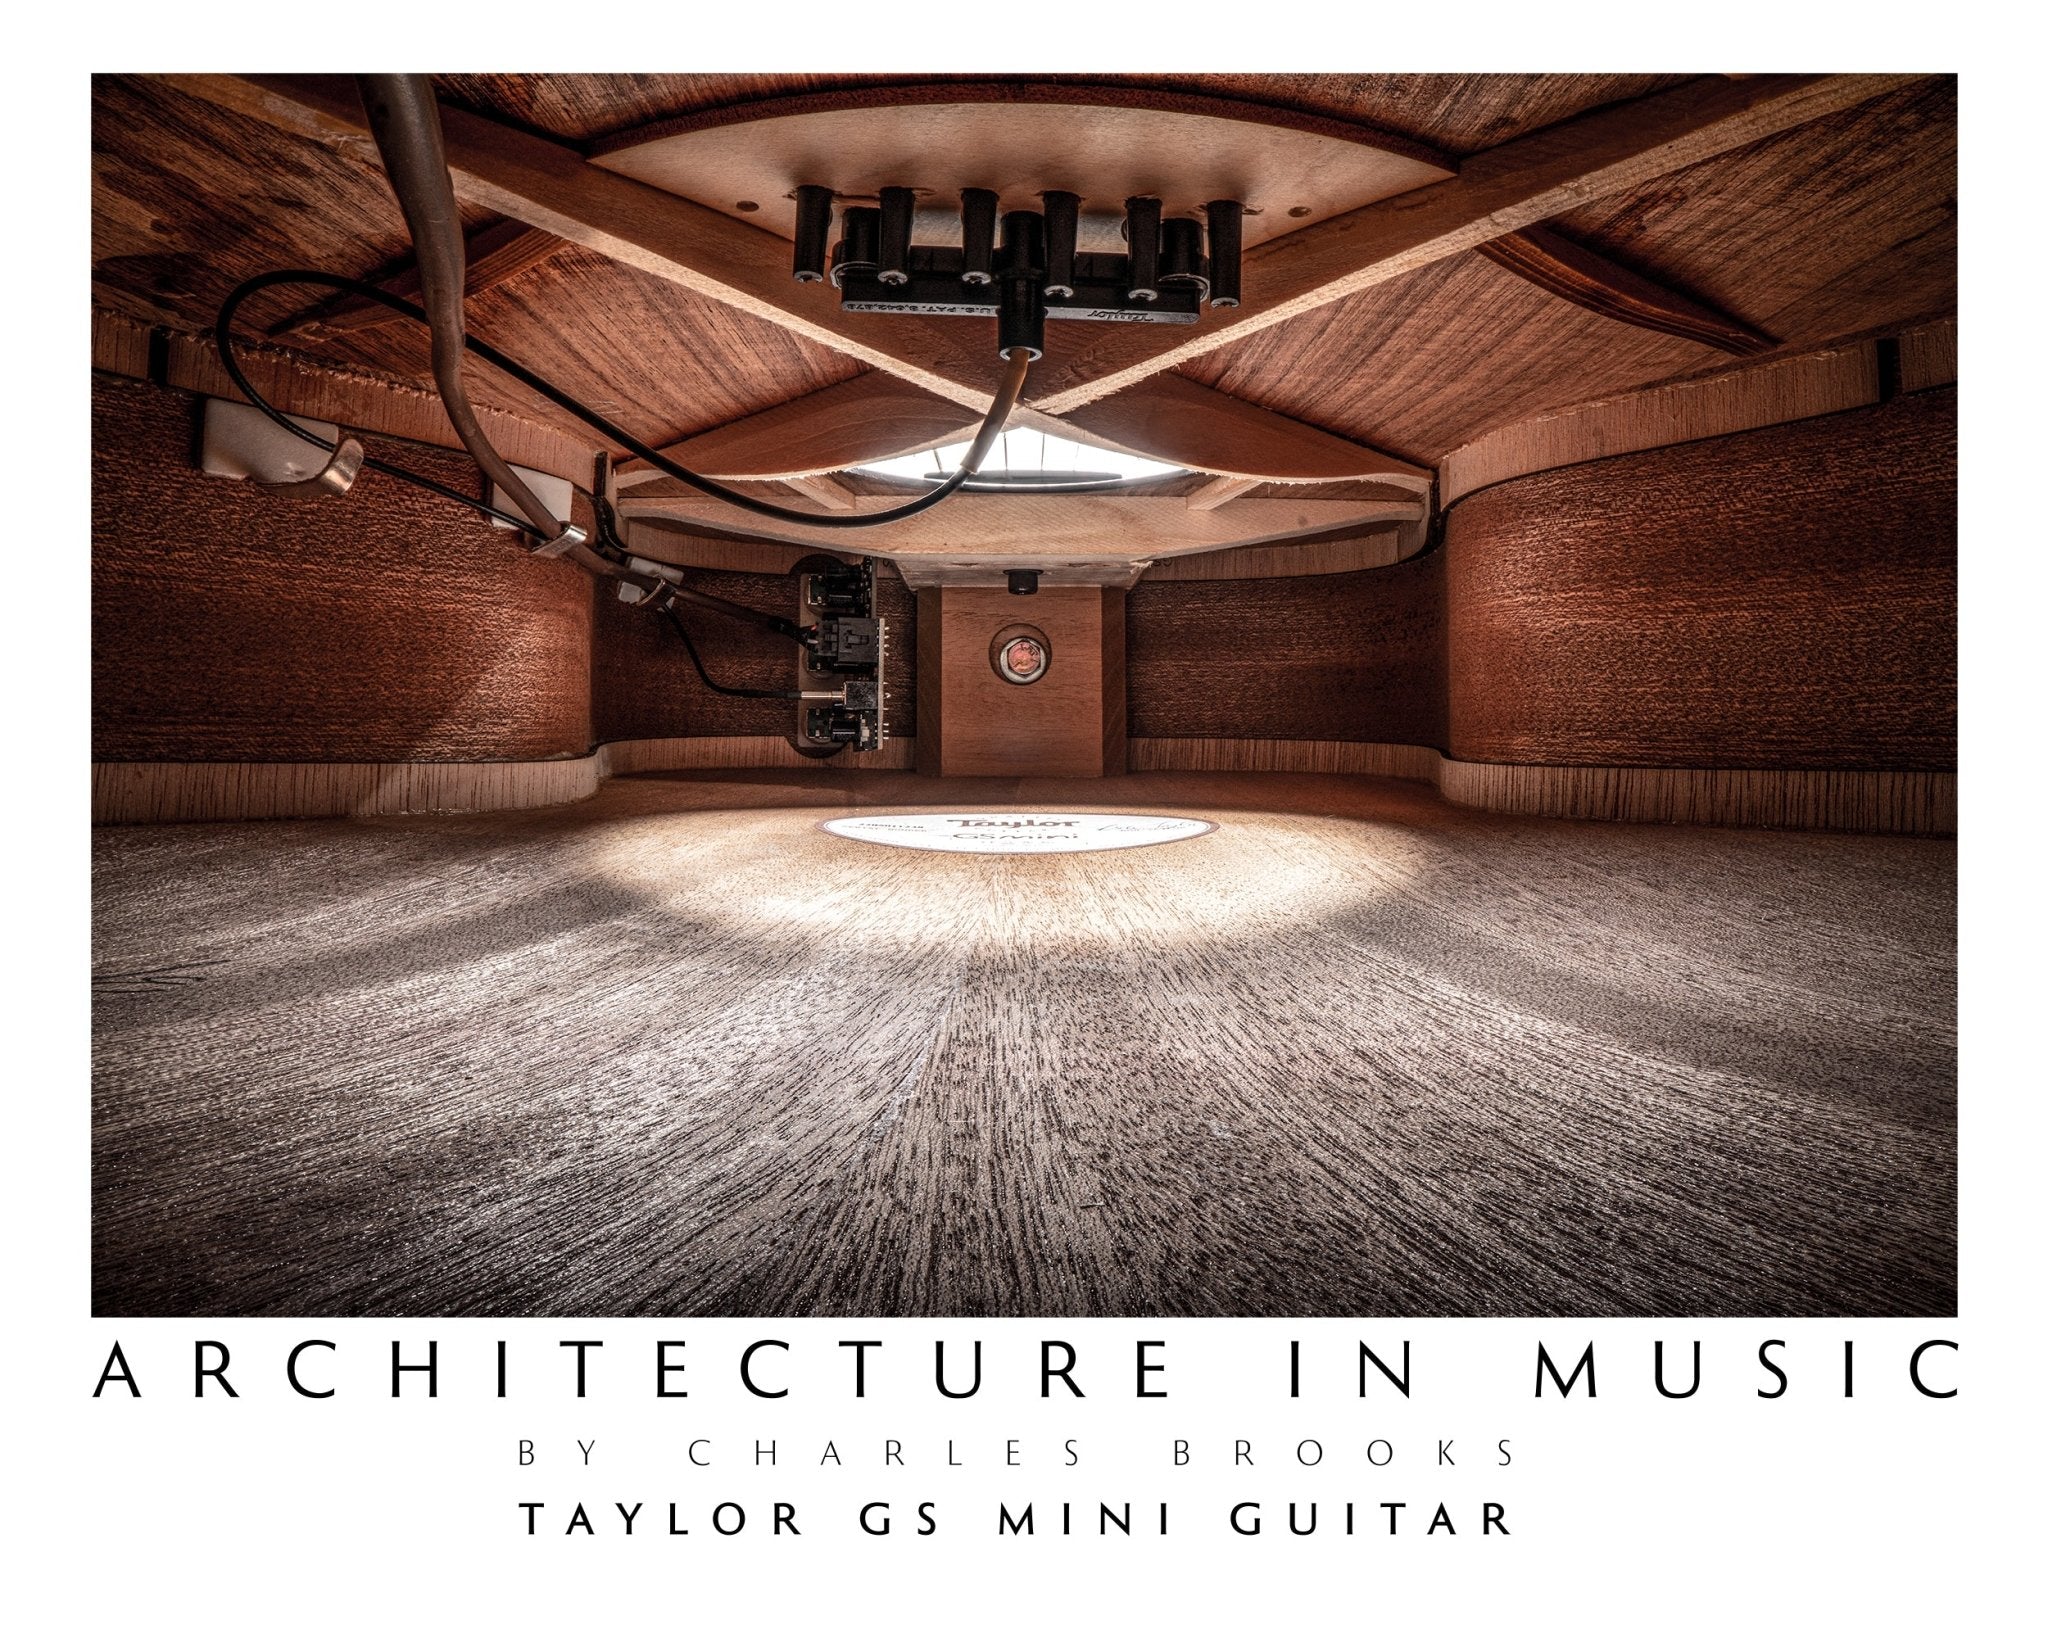 Photo of Taylor GS Mini Guitar. High Quality Poster. - Giclée Poster Print - Architecture In Music